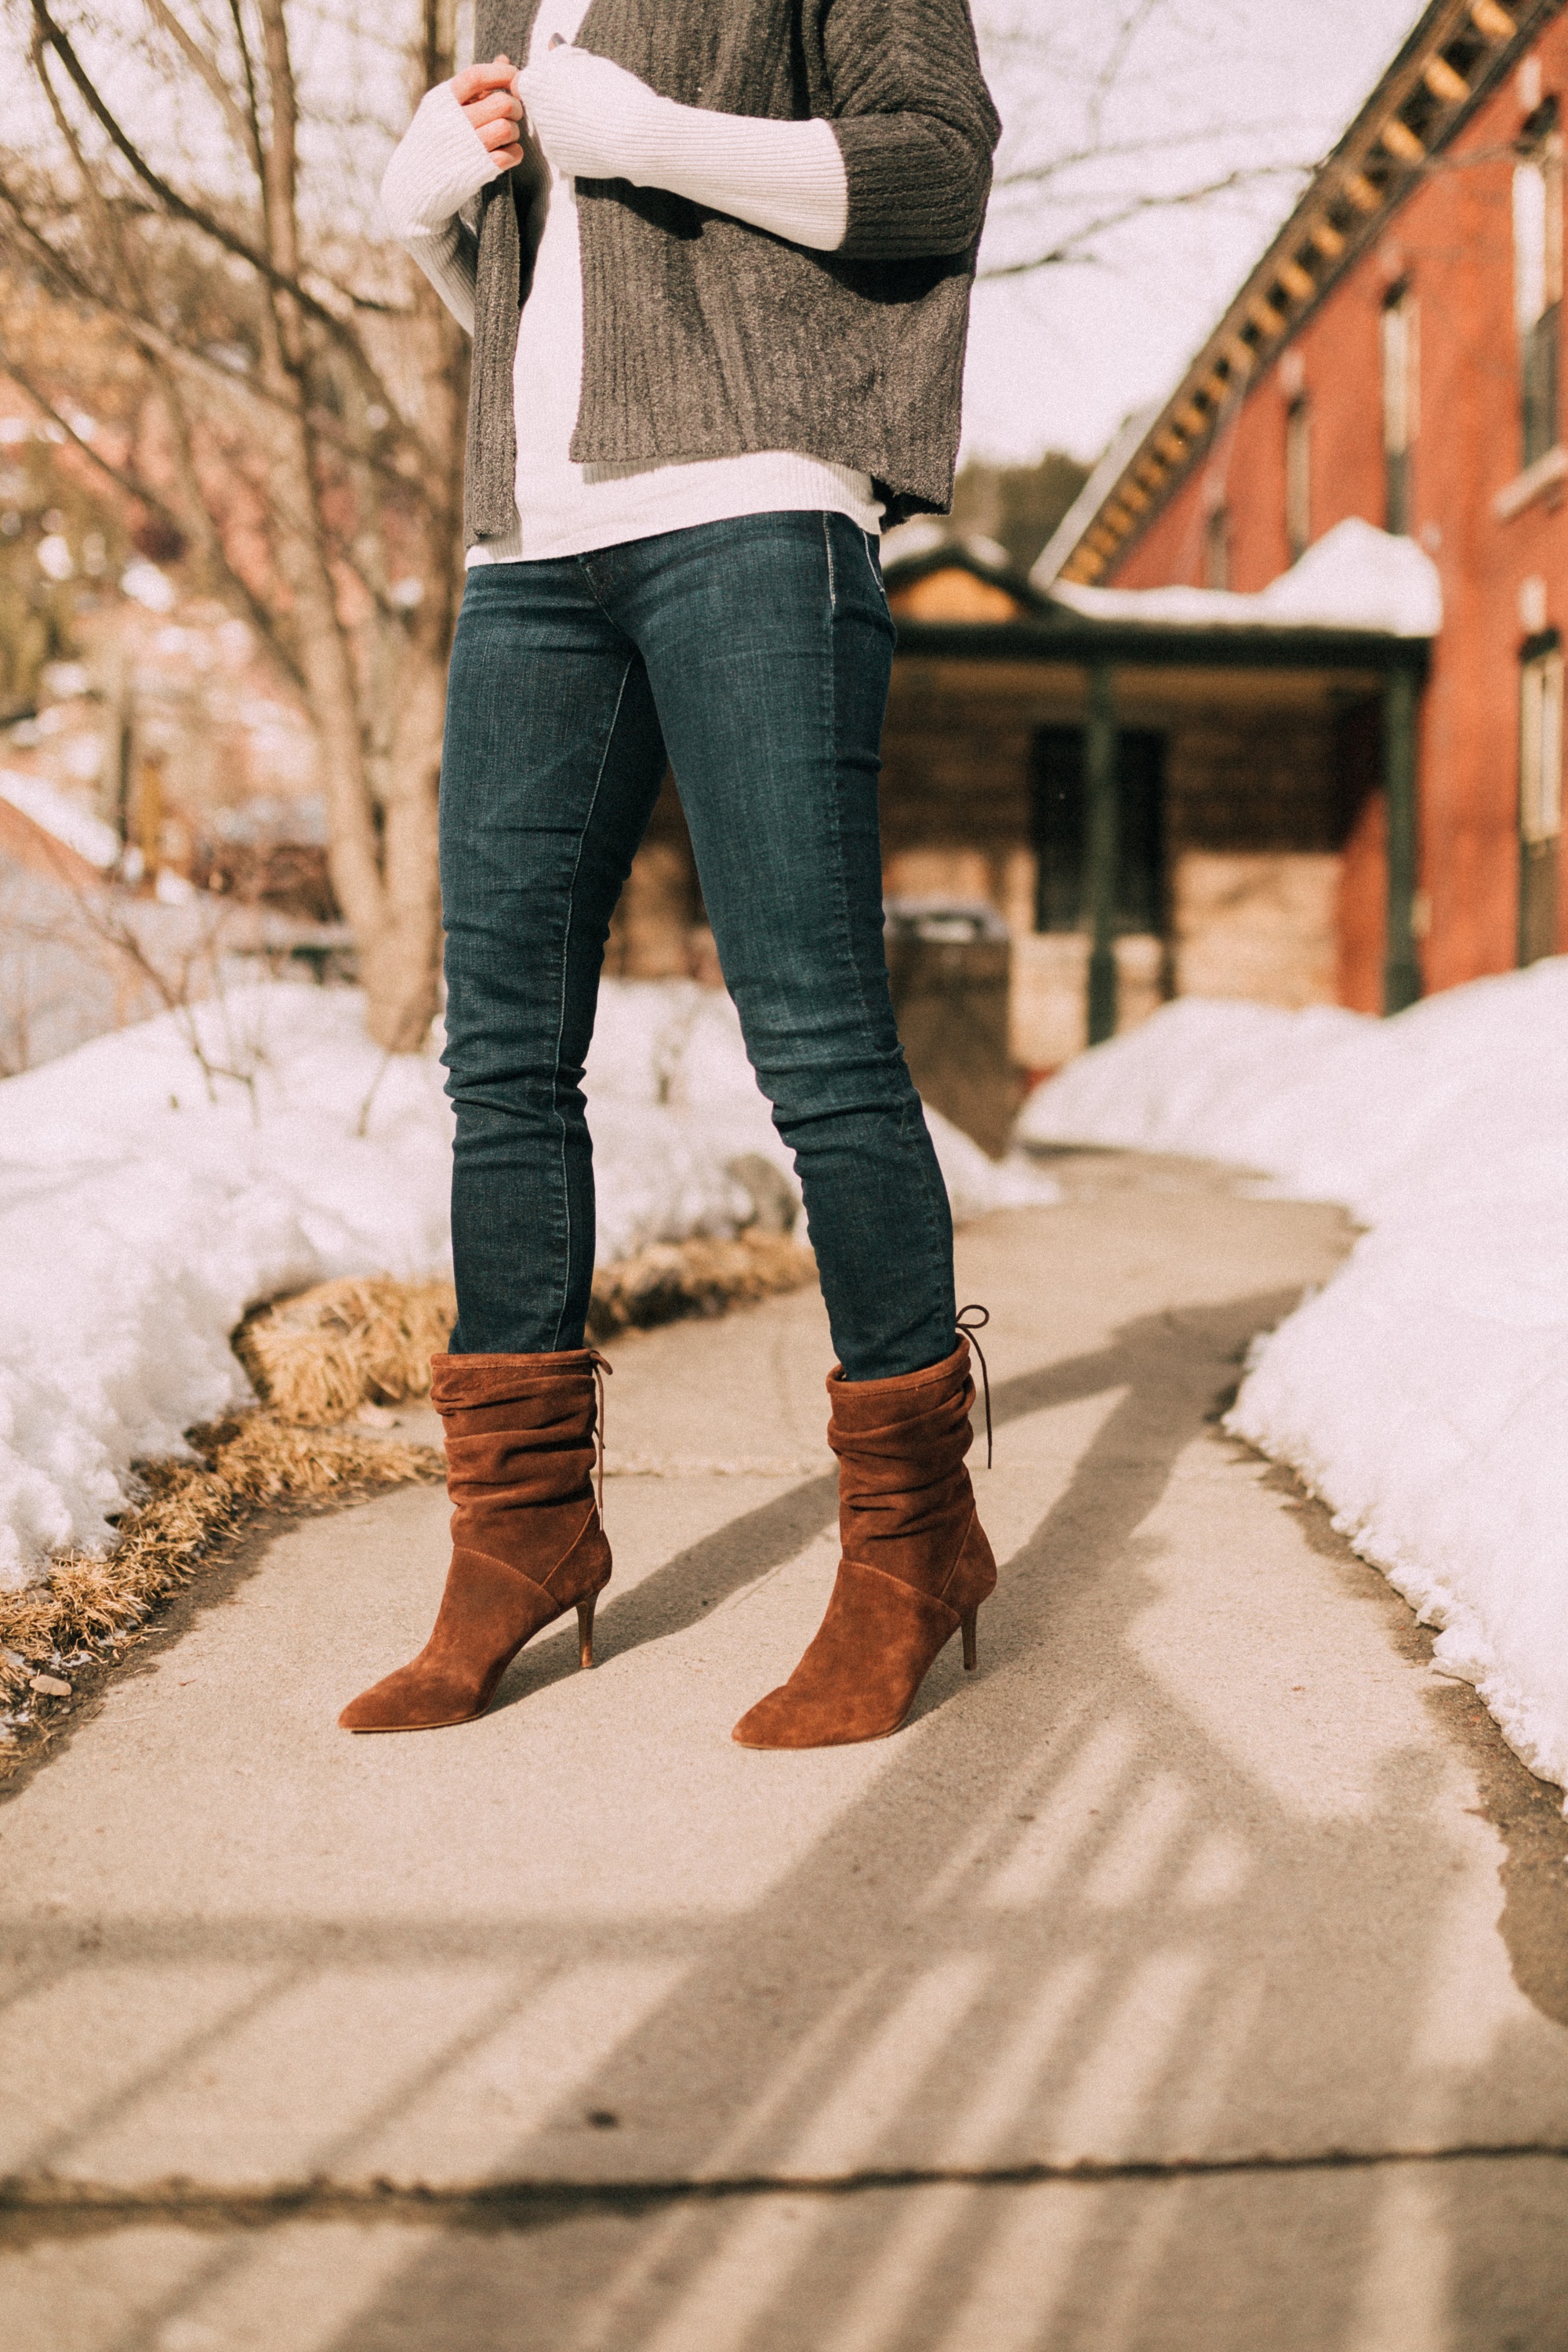 Fashion blogger Erin Busbee of BusbeeStyle.com wearing brown heeled booties from QVC with dark wash skinny jeans, a white turtleneck, and barefoot dreams shrug cardigan